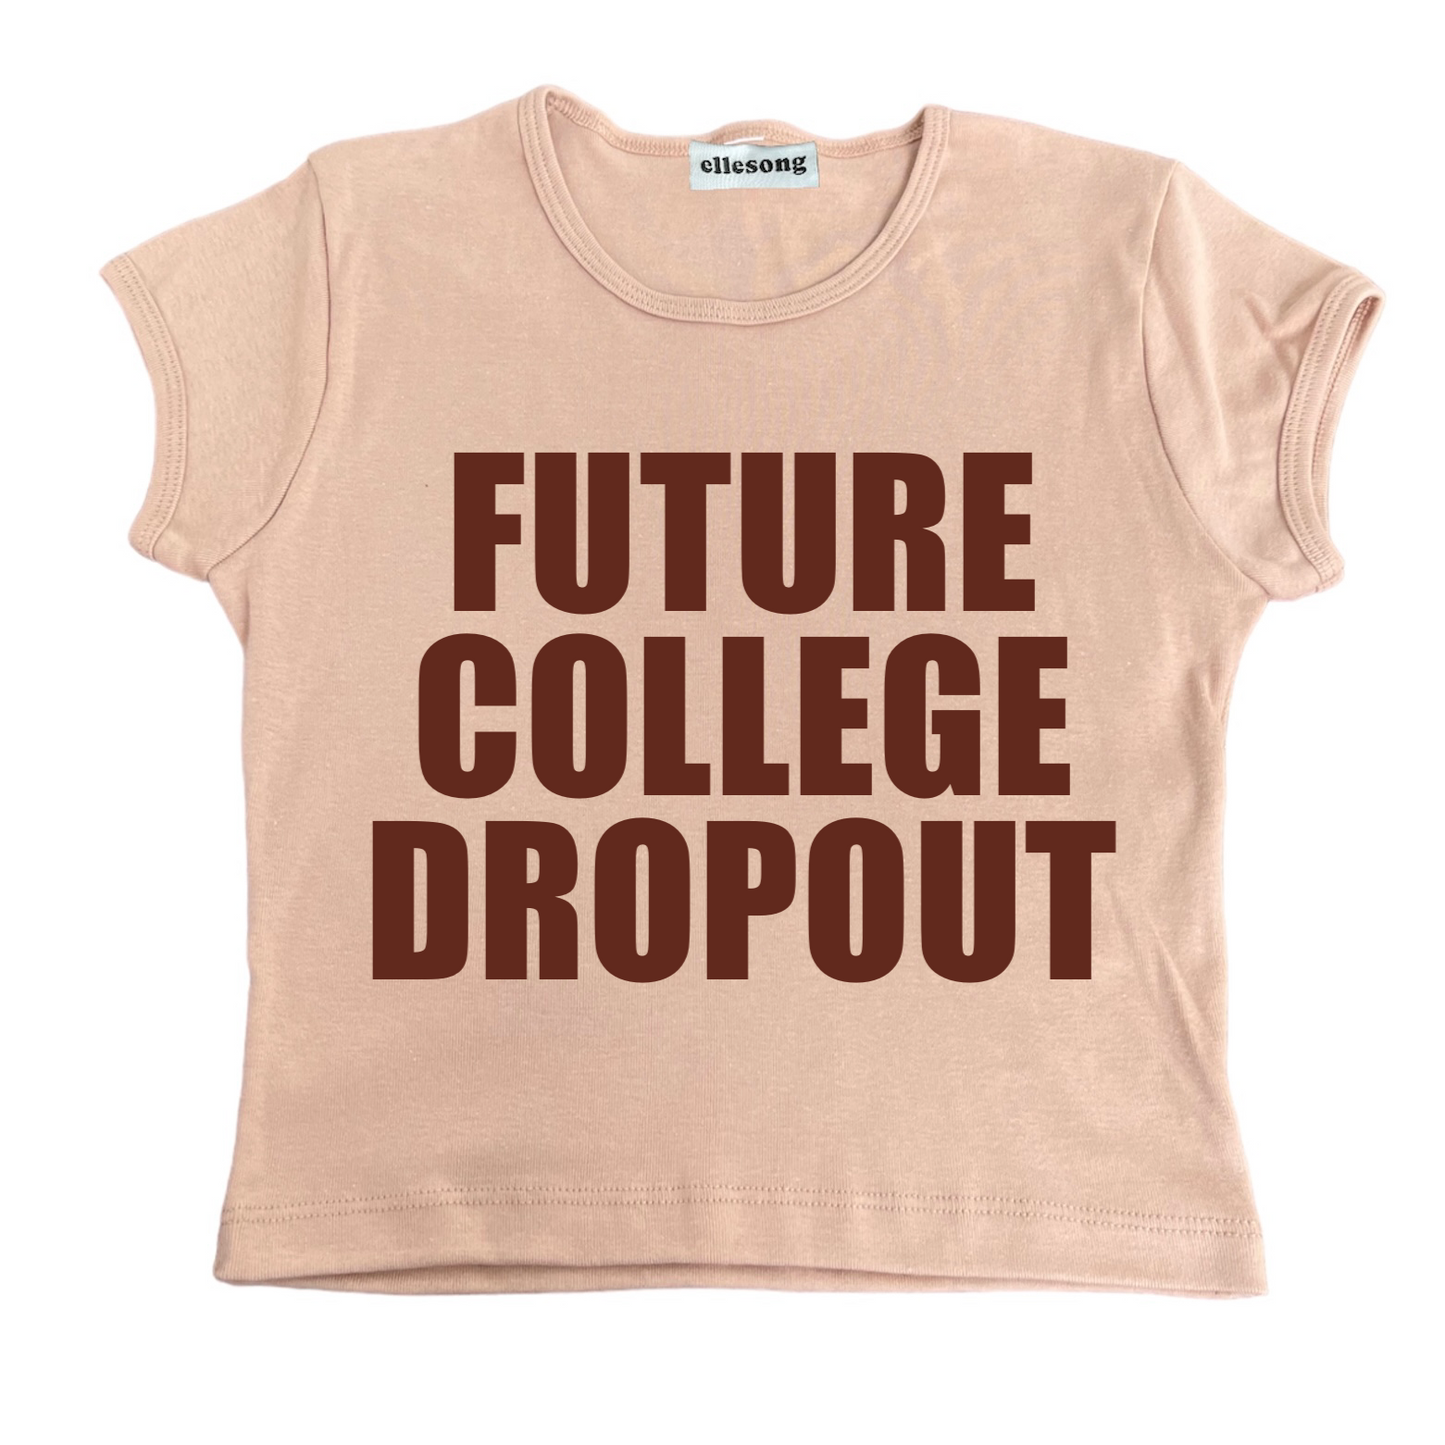 Future College Dropout Baby Tee